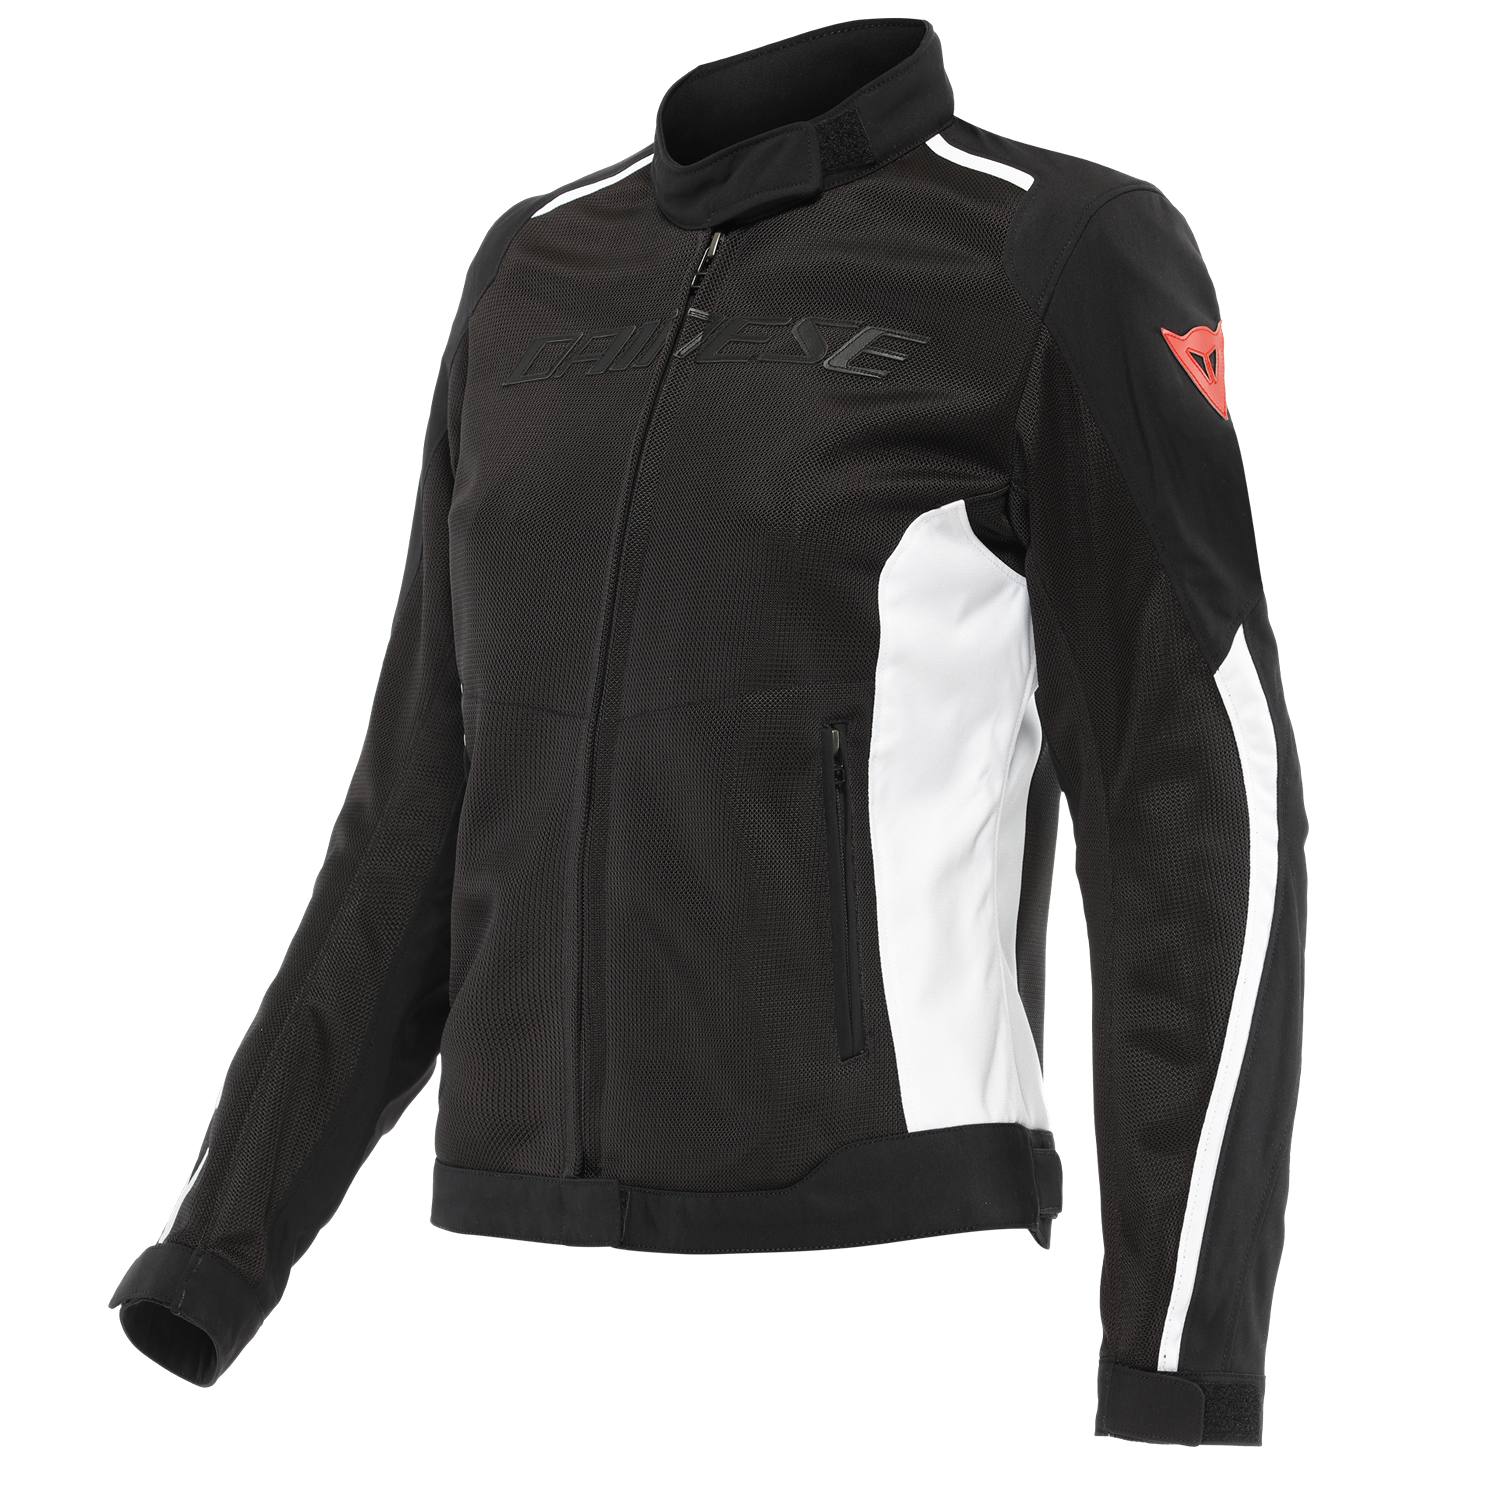 Image of Dainese Hydraflux 2 Air D-Dry Jacket Lady Black White Size 46 ID 8051019401663